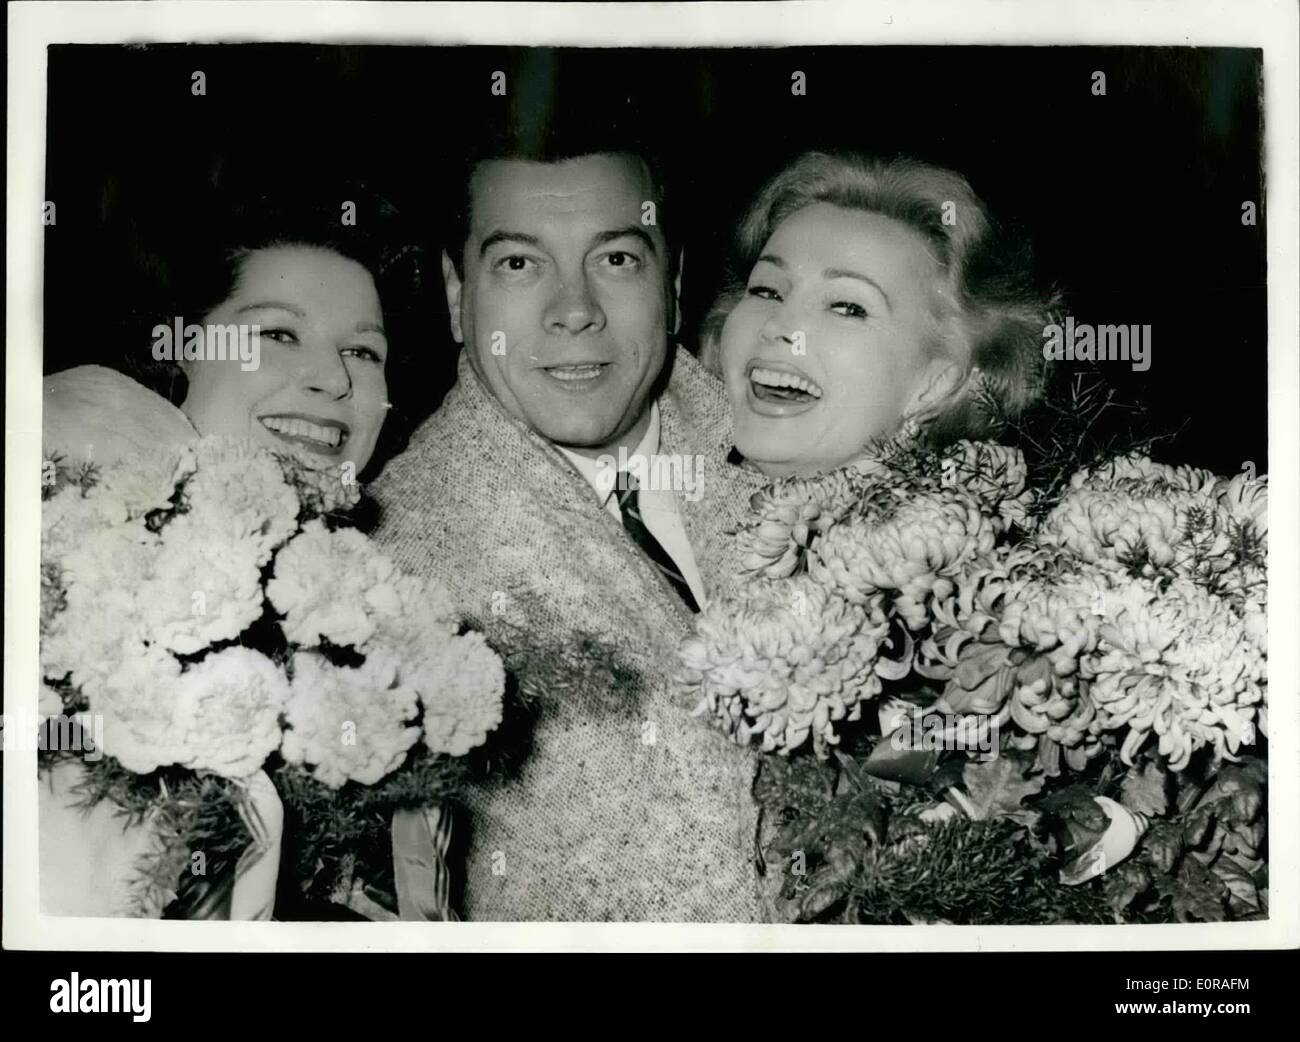 Nov. 11, 1958 - Mario Lanza Meets His Wife - And Zsa Zsa Gabor - In Berlin:  When Mario Lanza went to Berlin airport recently to Stock Photo - Alamy